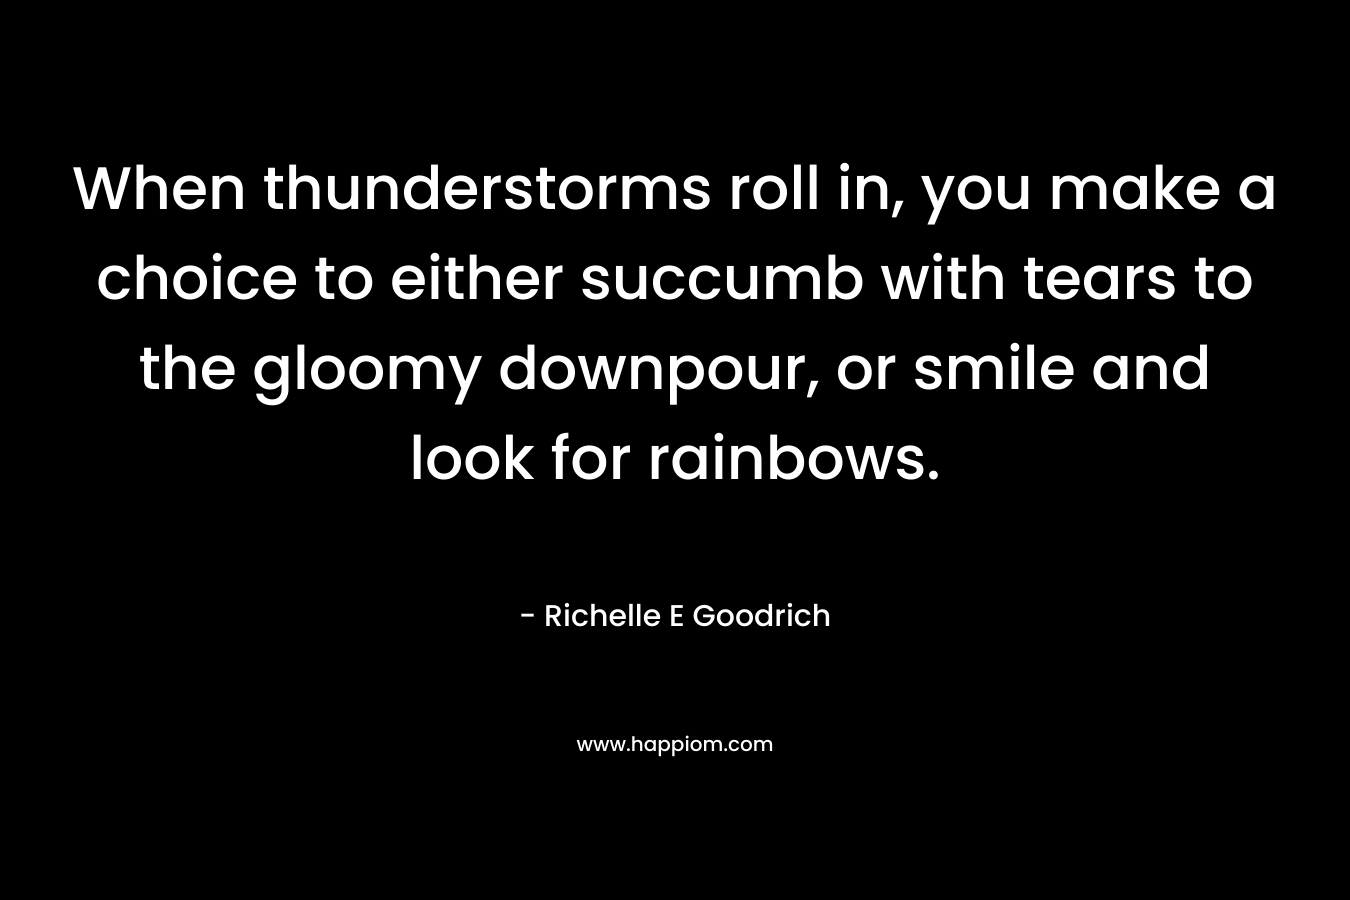 When thunderstorms roll in, you make a choice to either succumb with tears to the gloomy downpour, or smile and look for rainbows. – Richelle E Goodrich